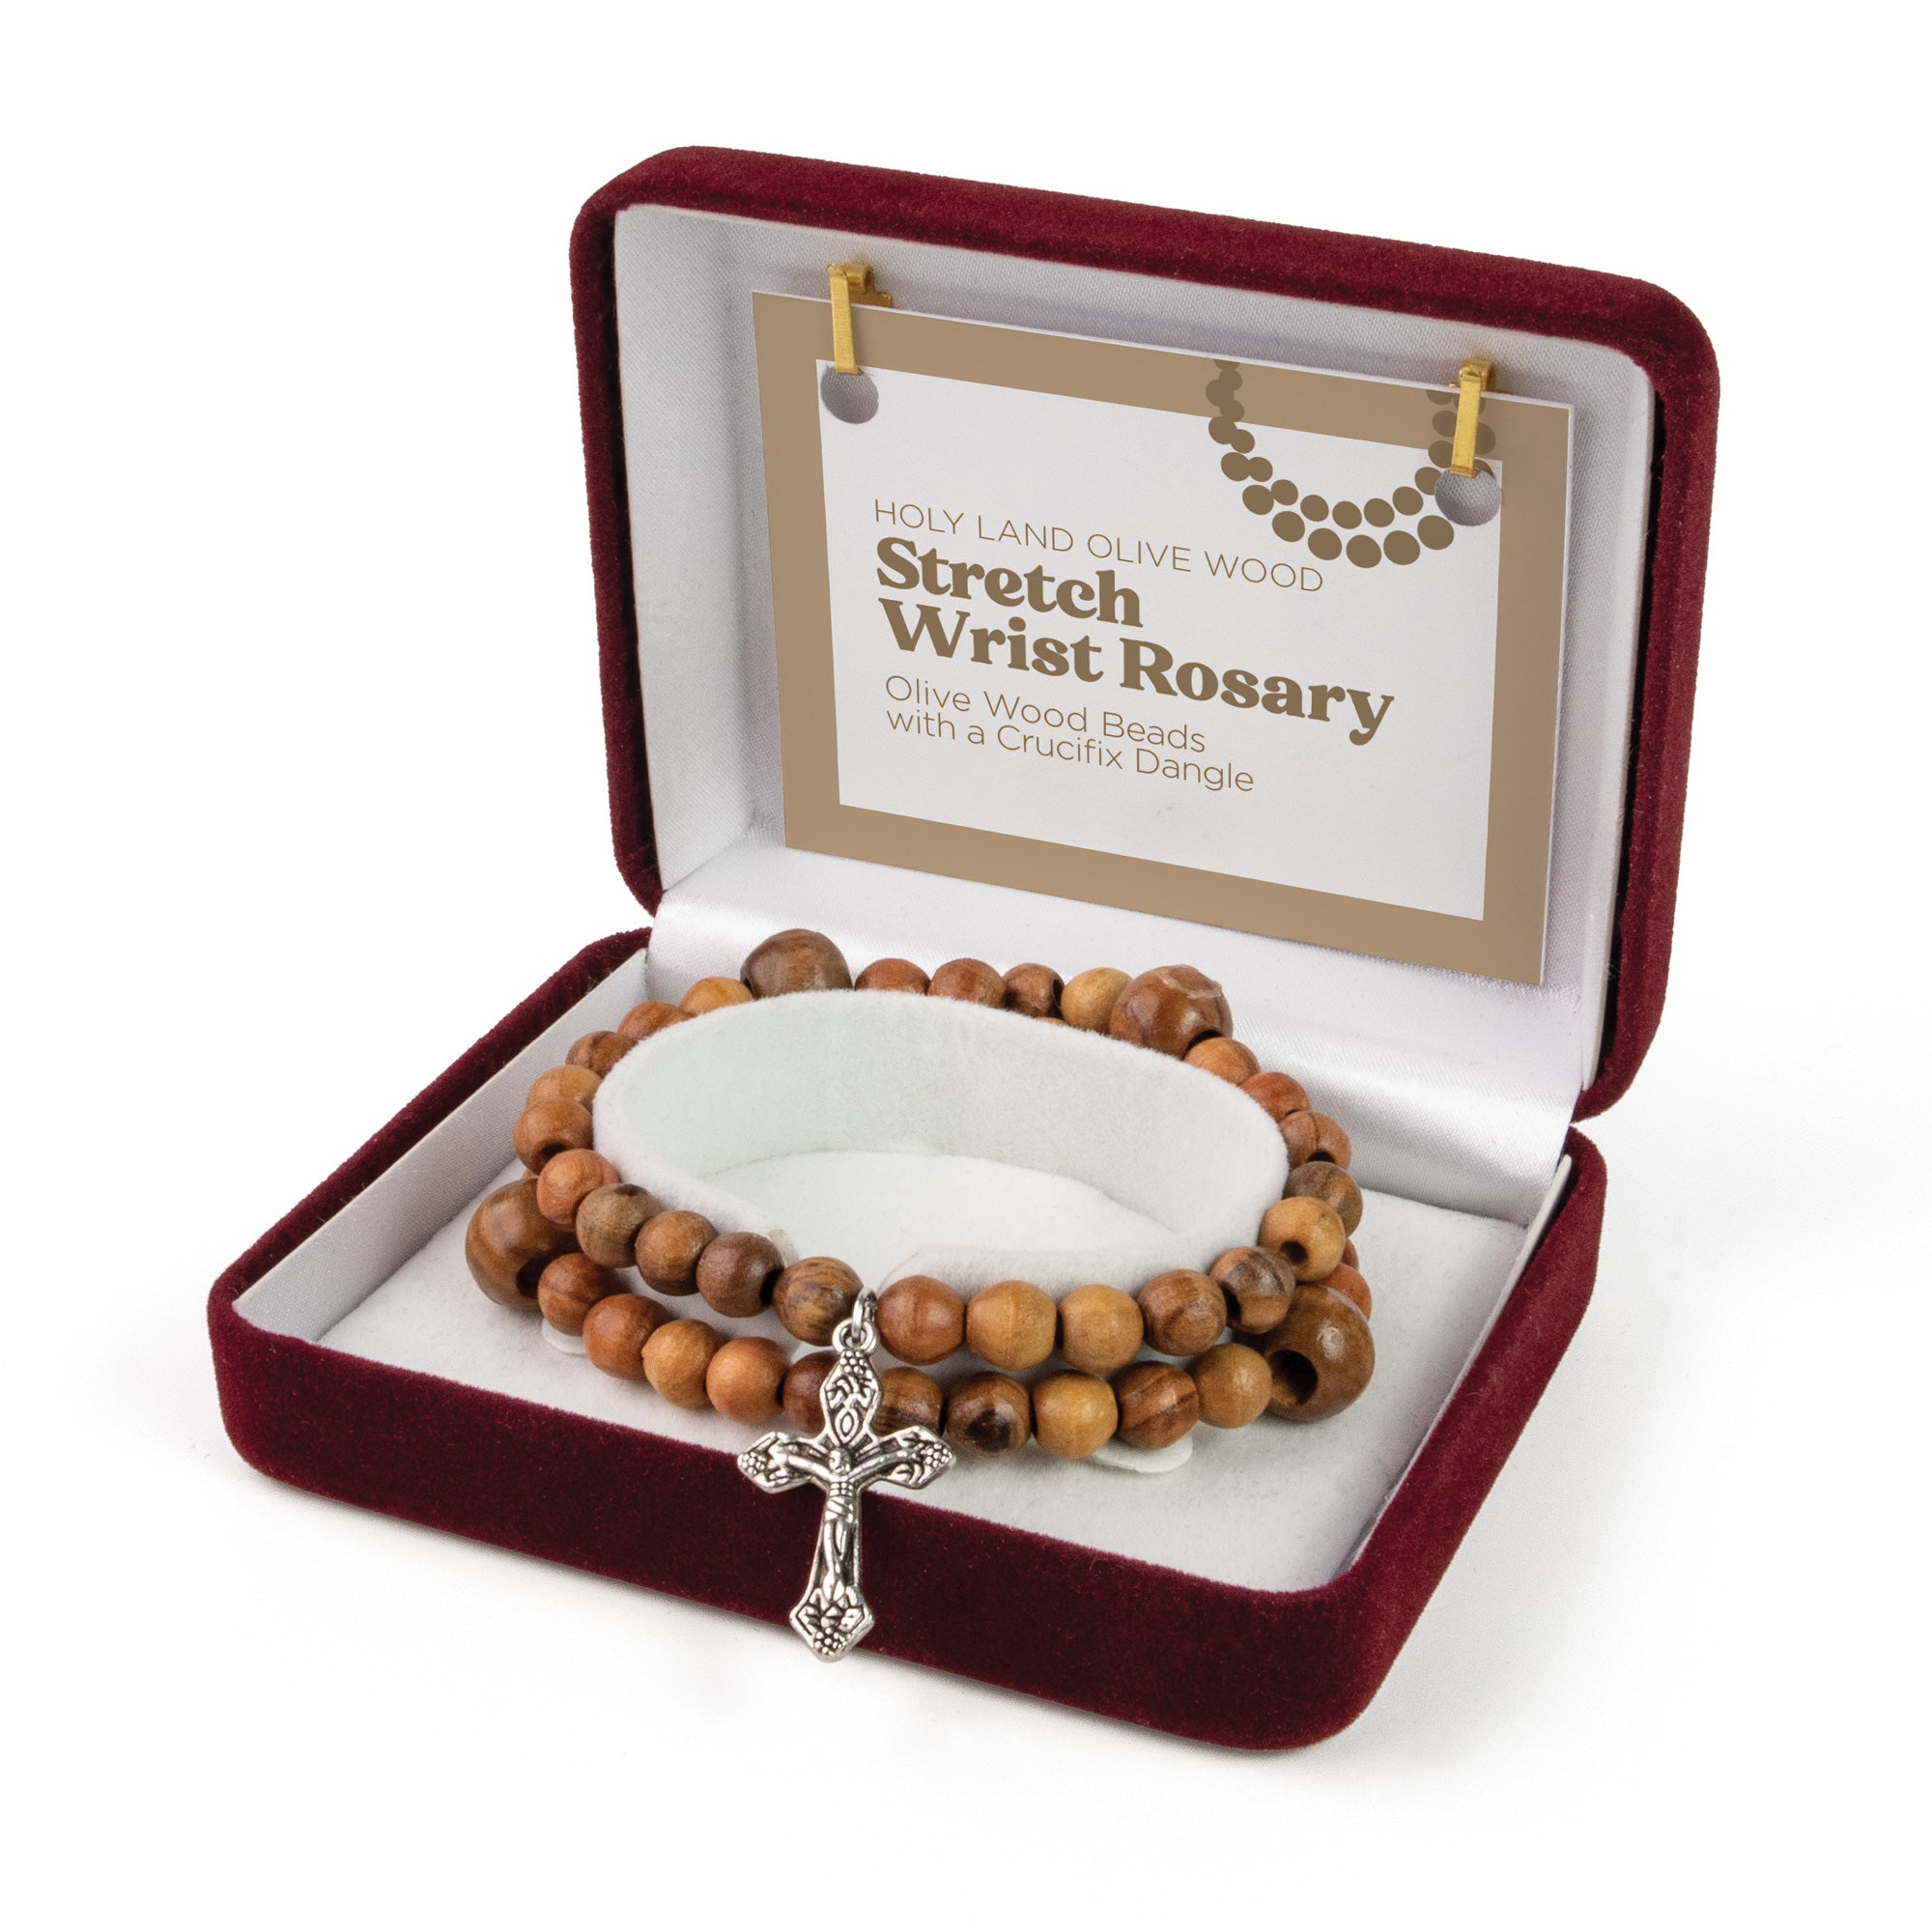 Wrist Rosary with Olive Wood Beads and Crucifix Dangle in Velvet Box